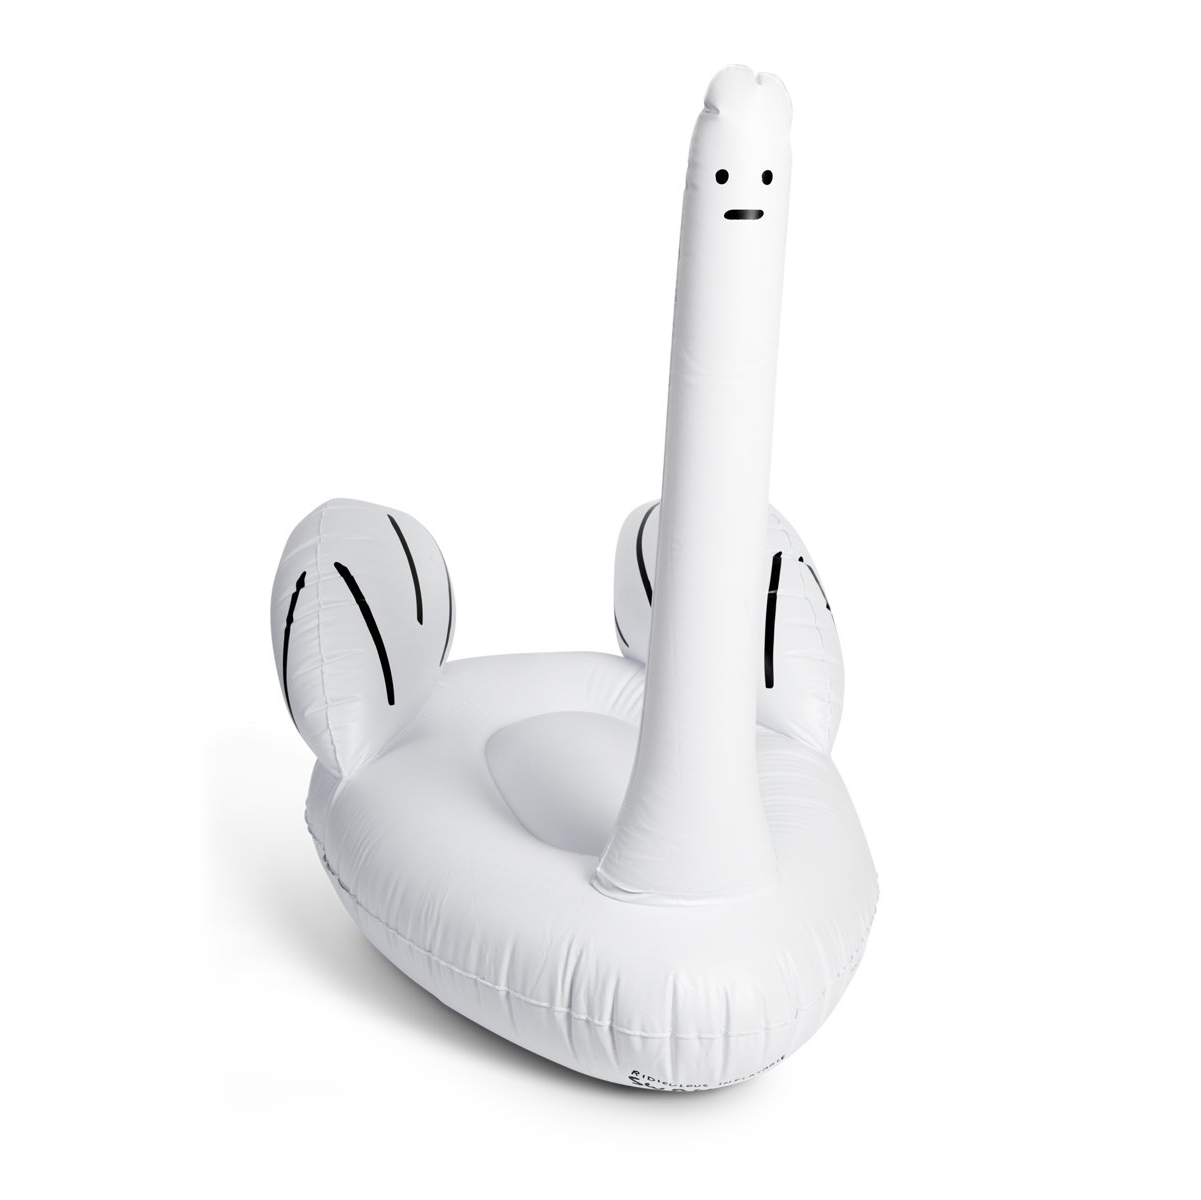 Ridiculous Inflatable Swan-Thing x David Shrigley